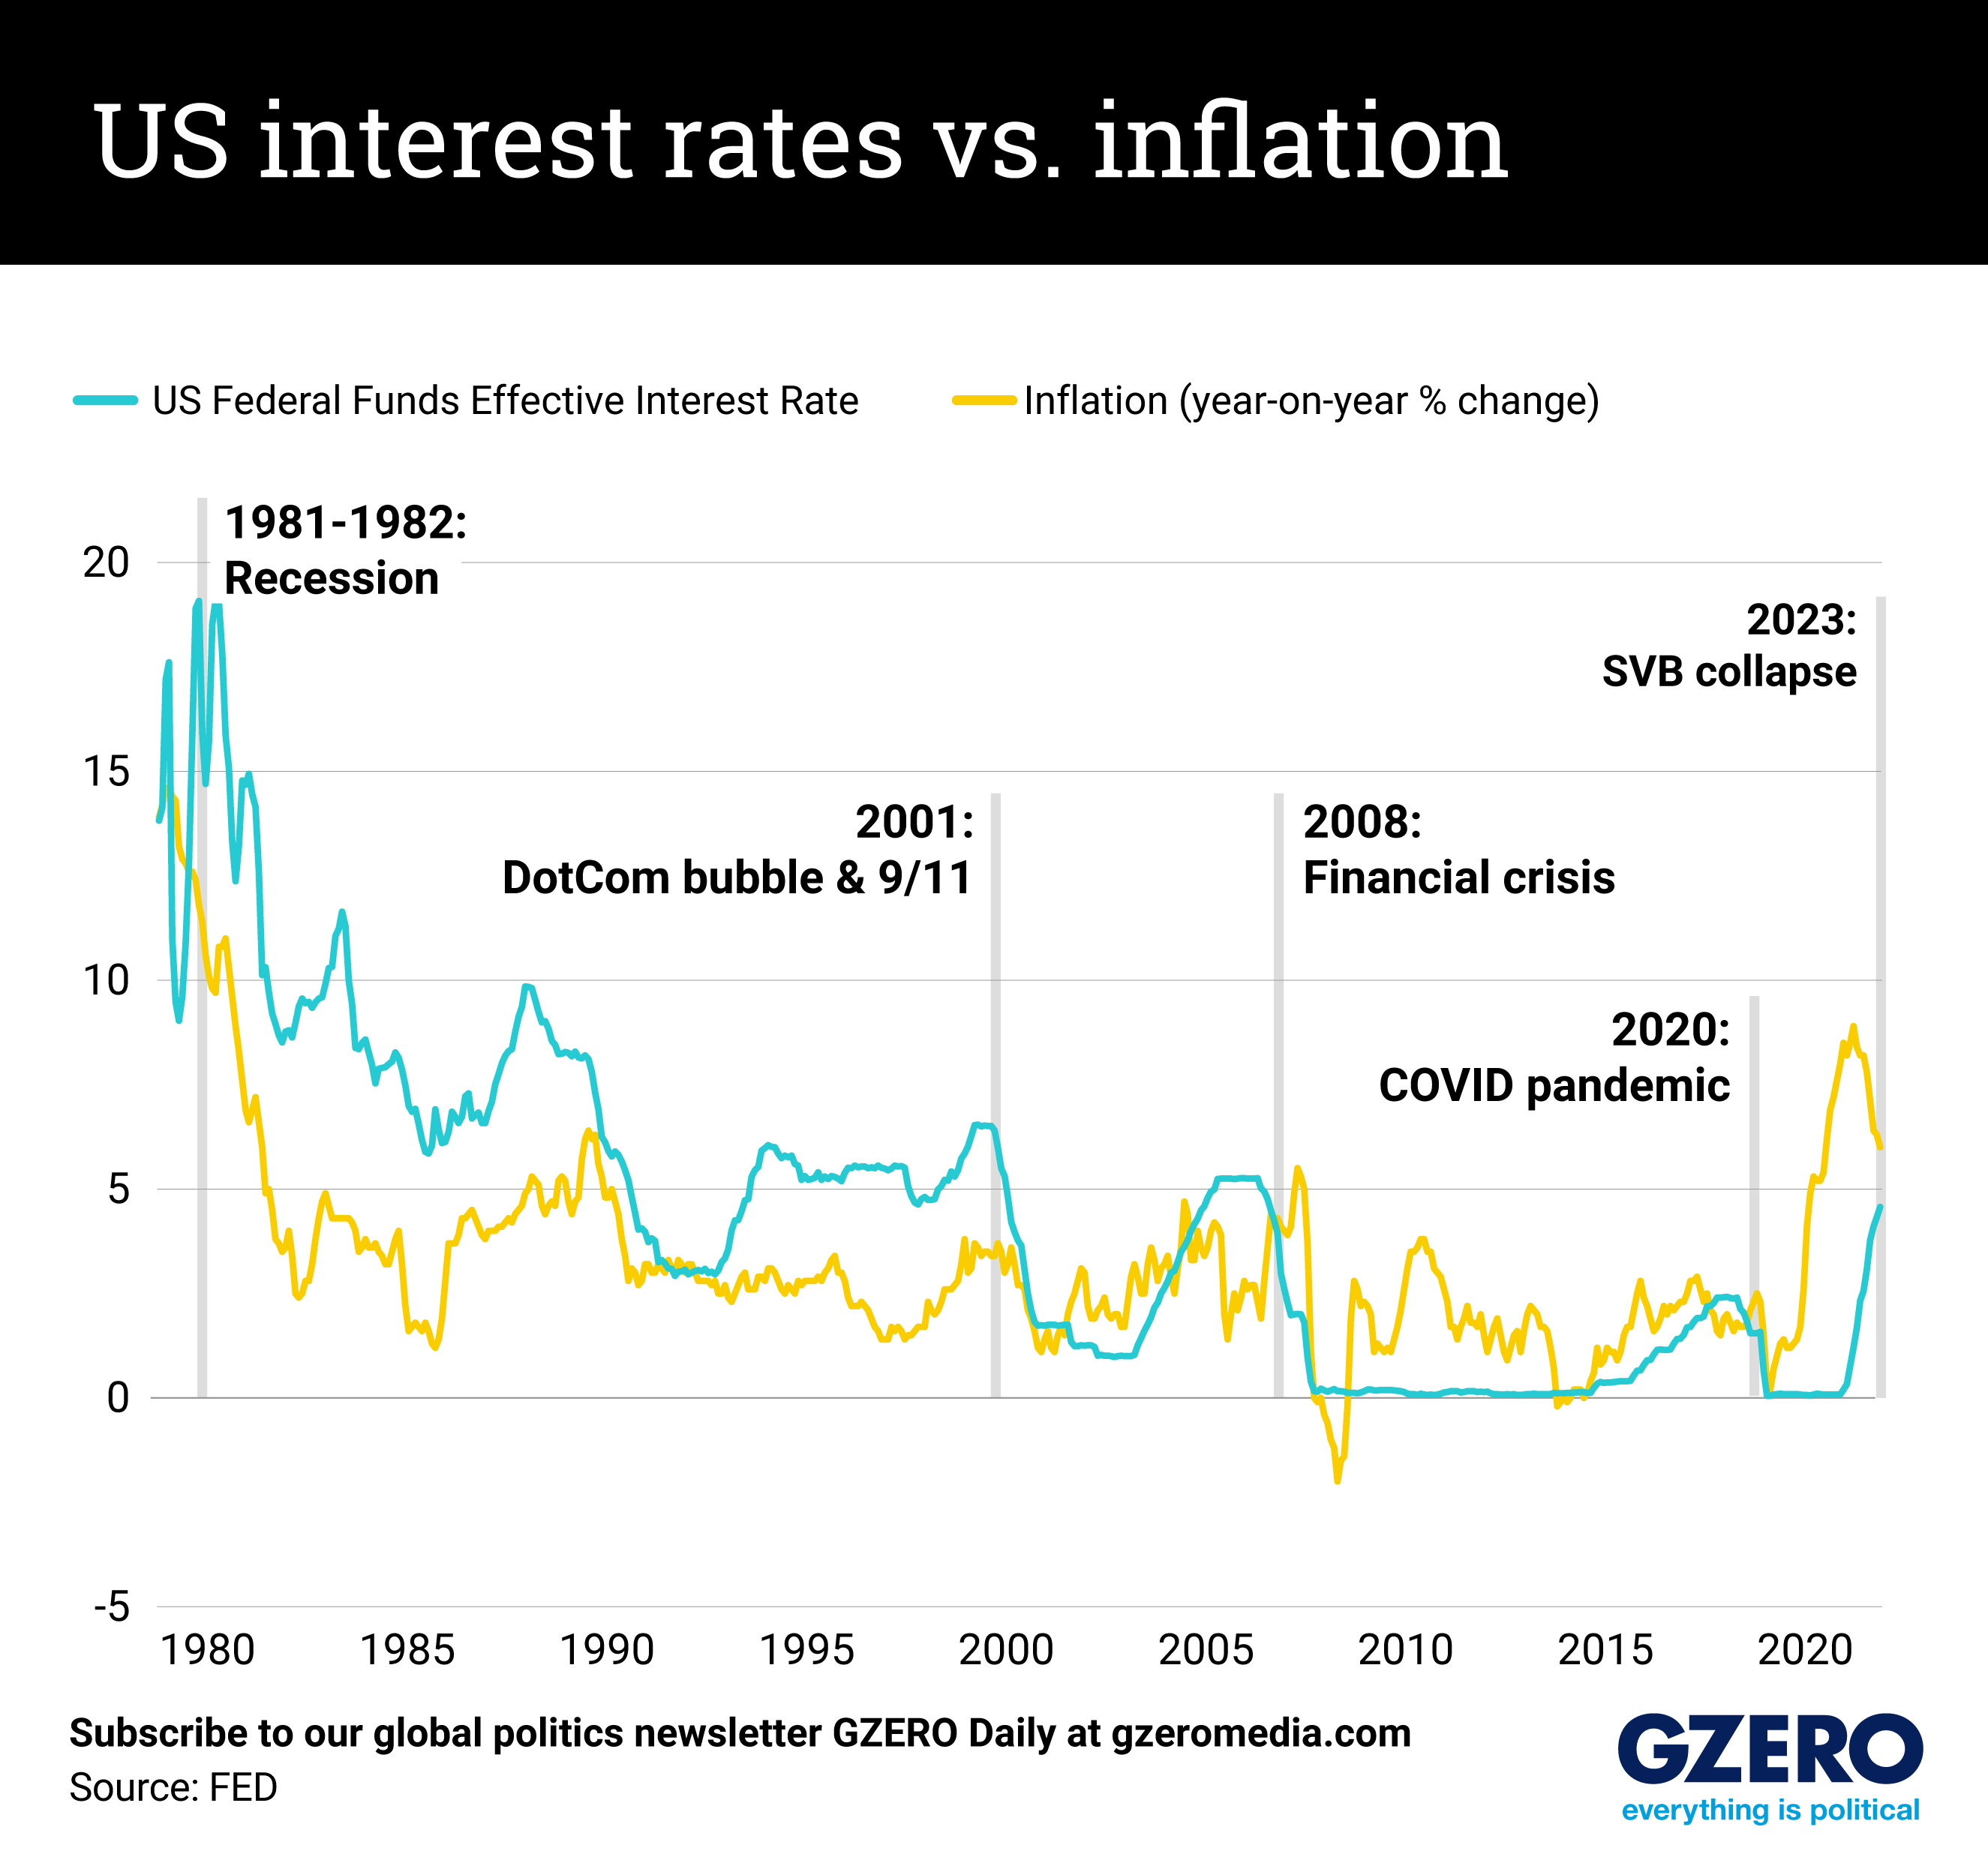 A graph comparing the US Federal Funds Effective Interest Rate with the year-on-year percentage change in inflation.